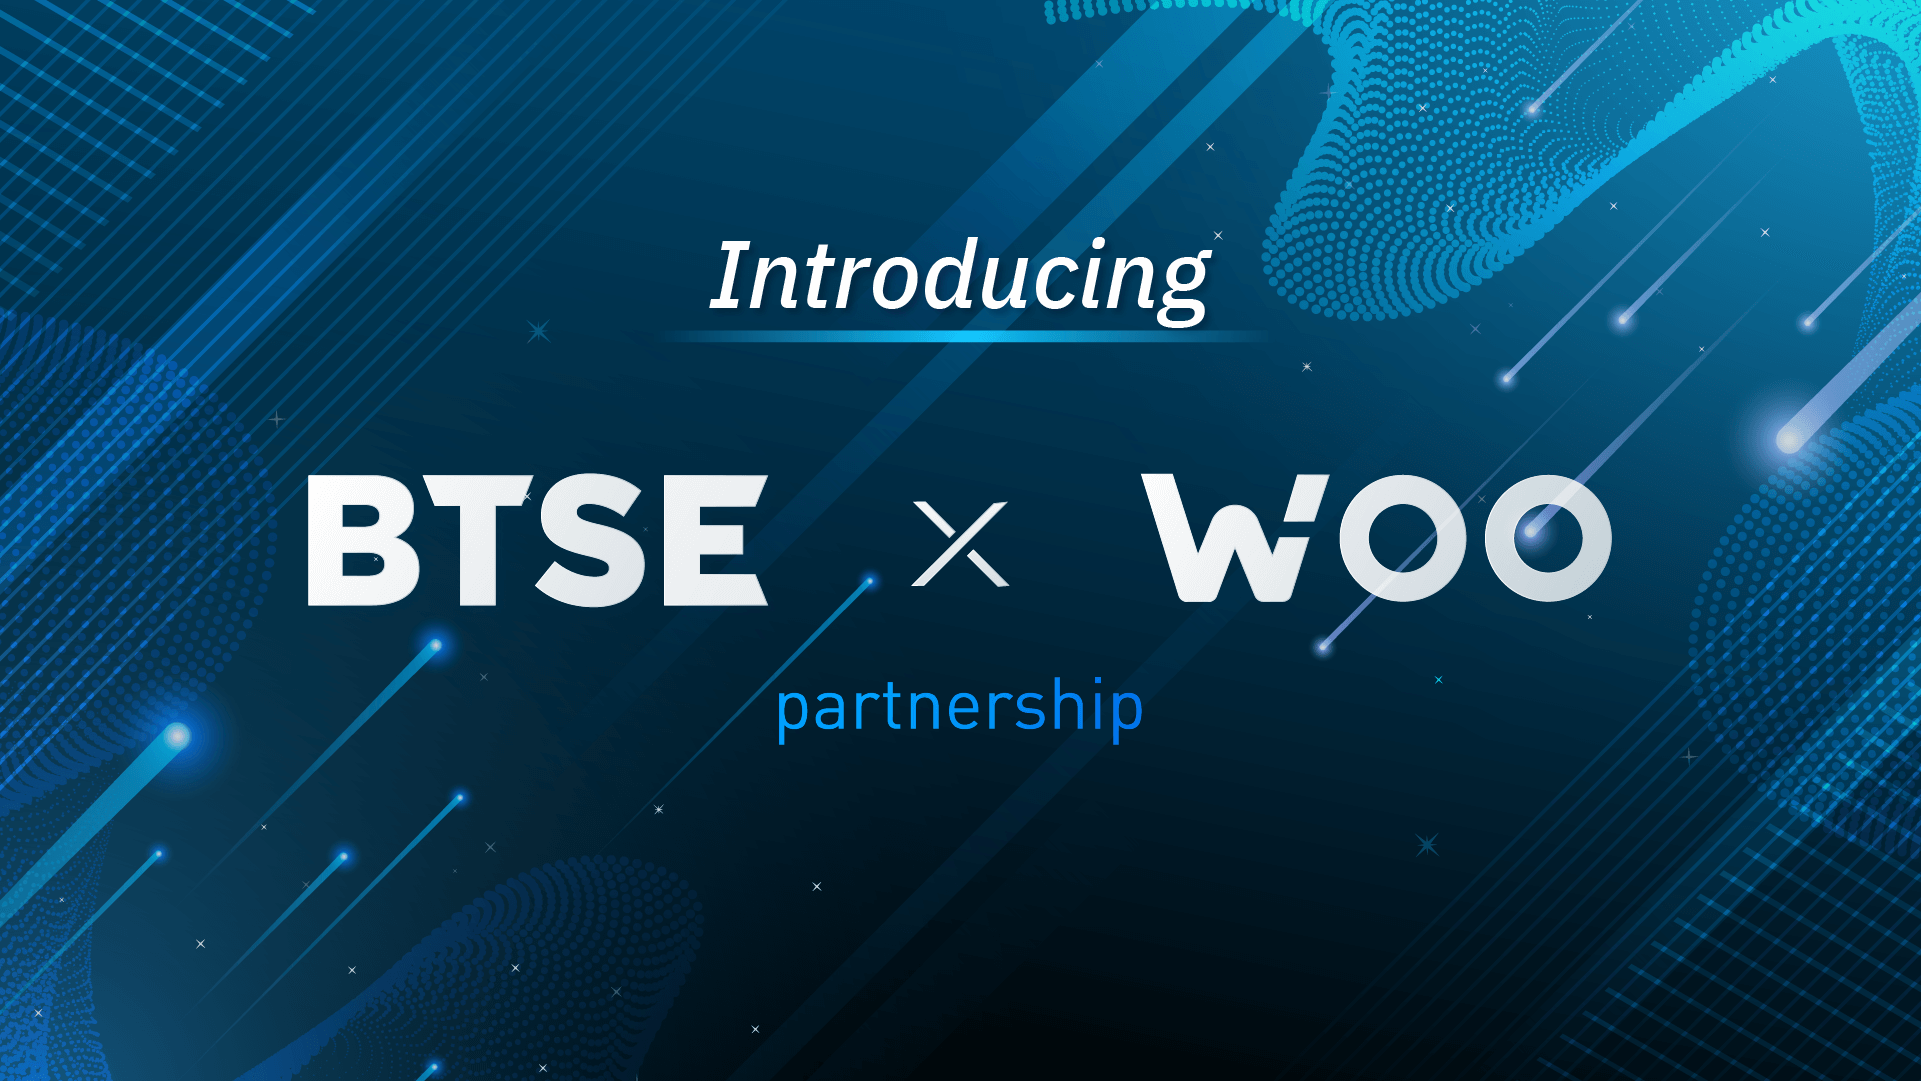 BTSE Announces Strategic Partnership with Wootrade